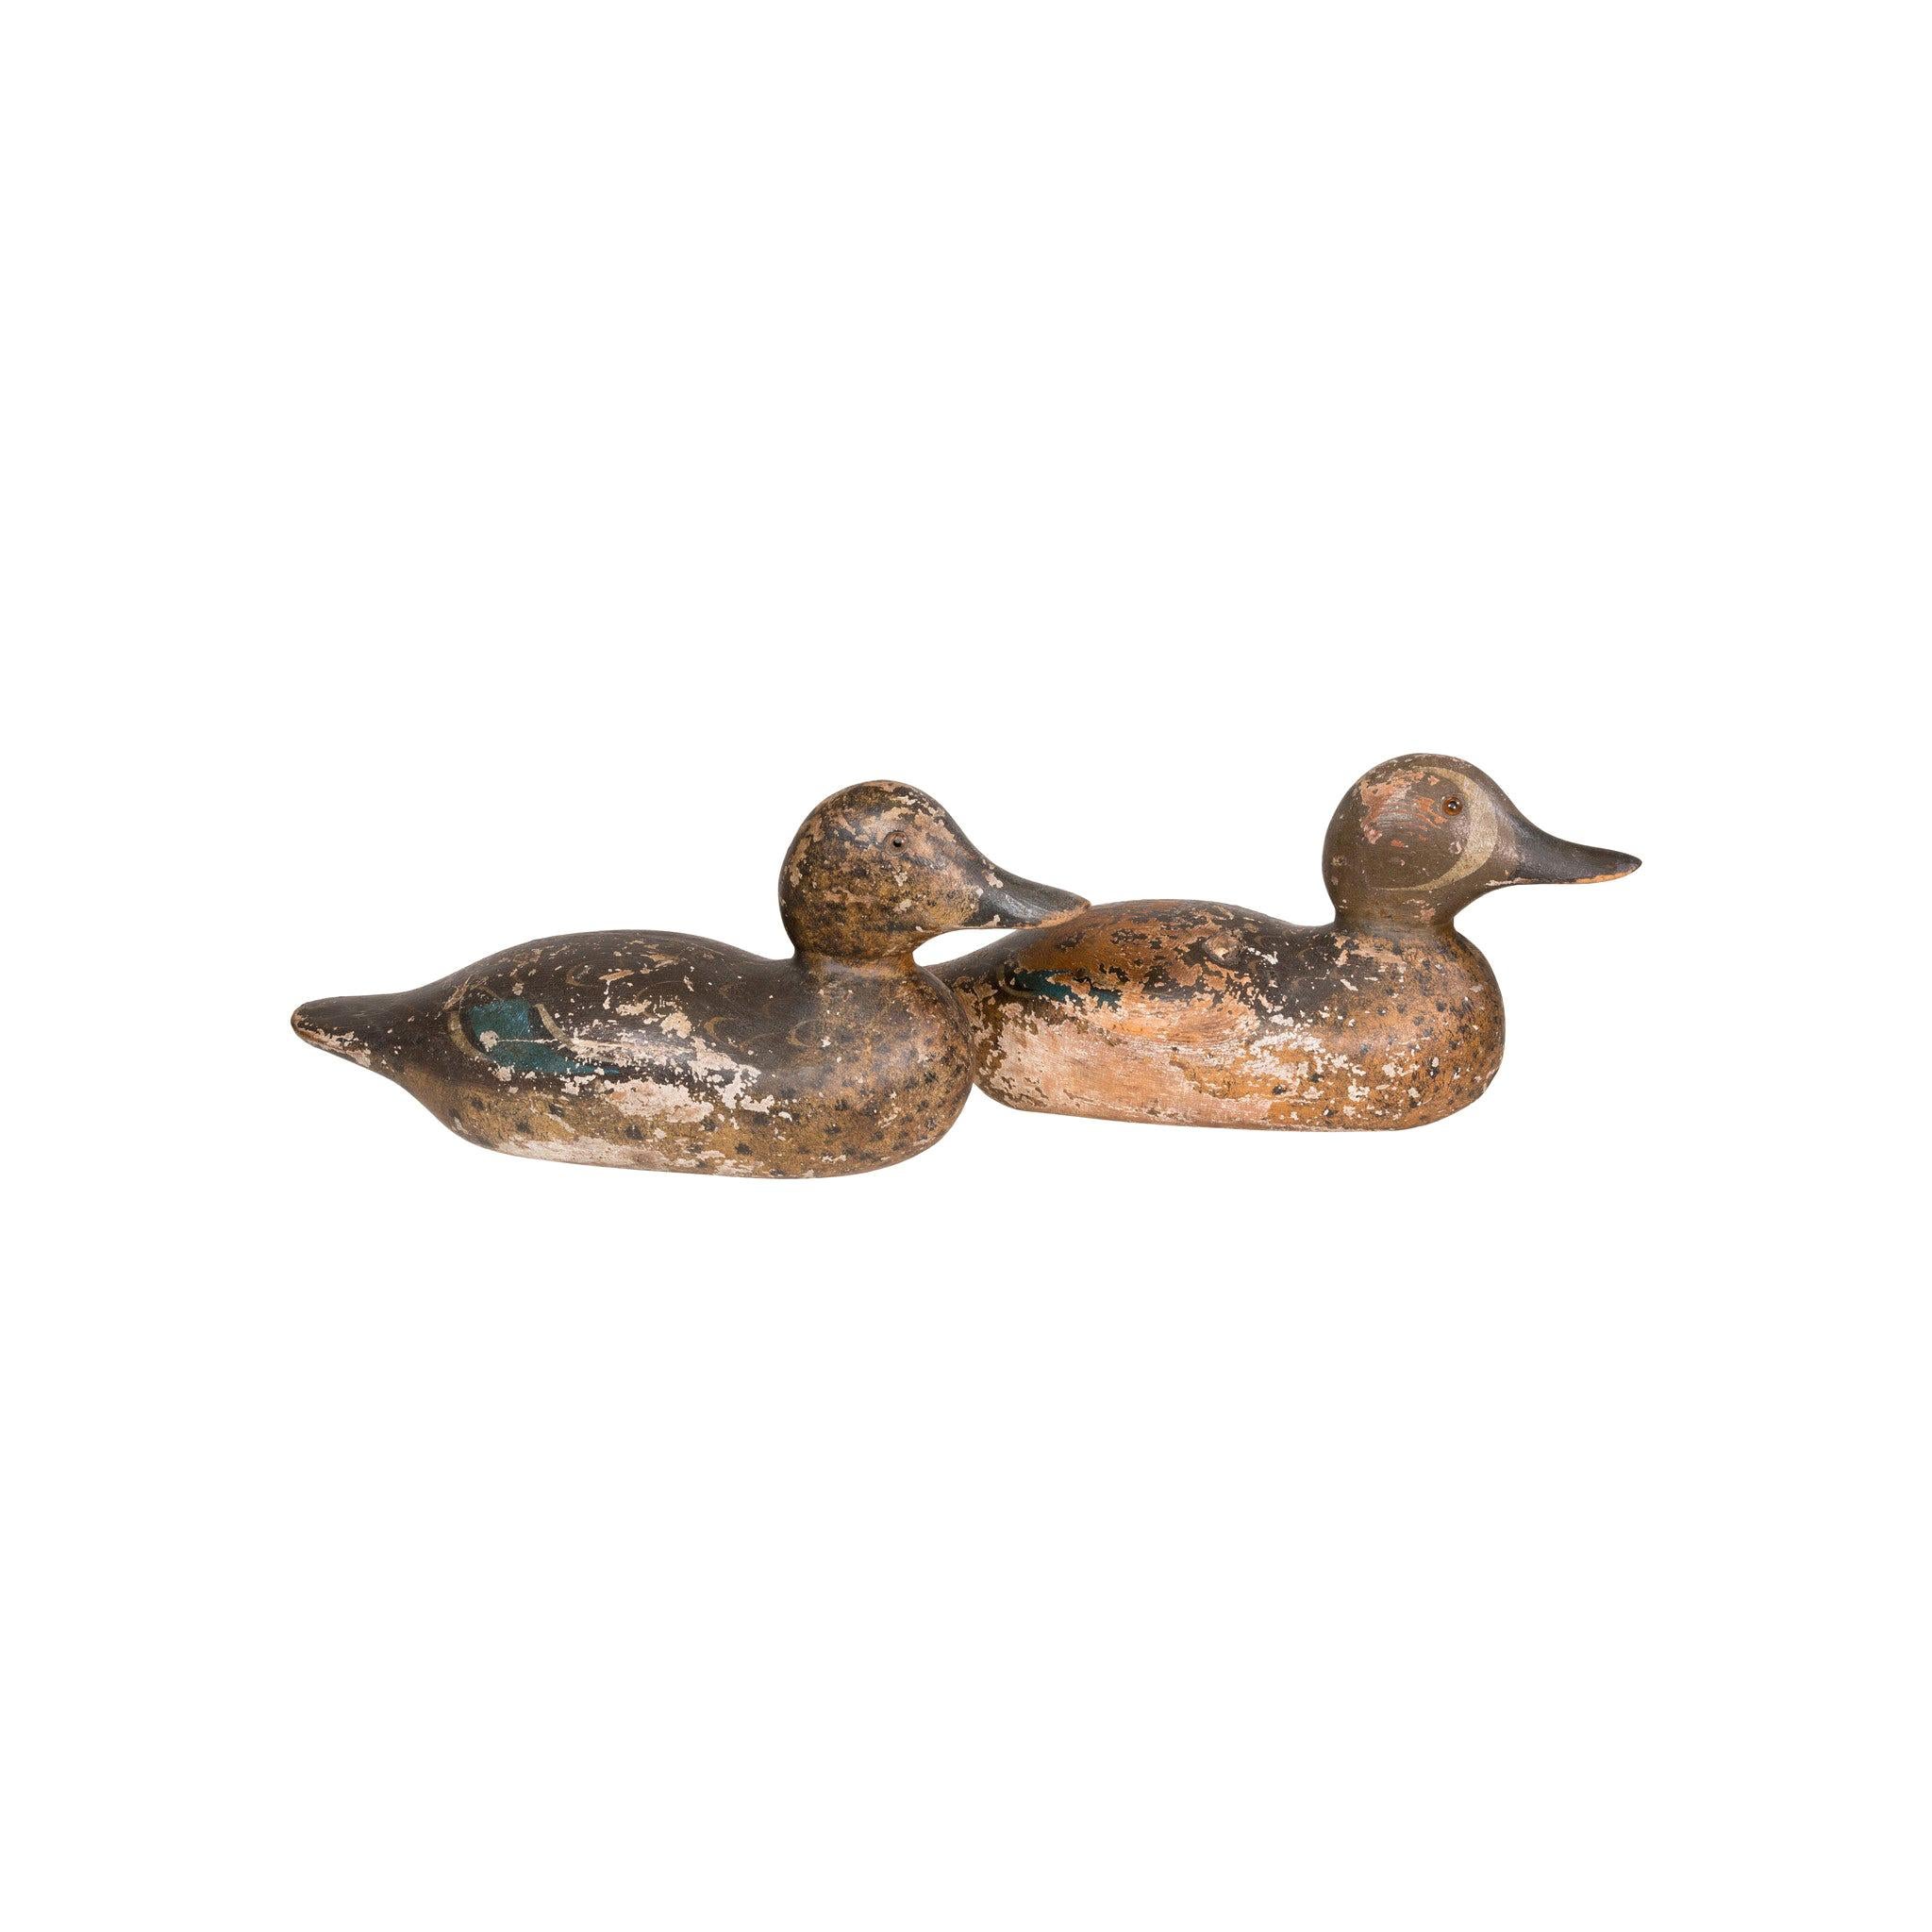 Pair of Mason Blue Wing Teal Decoys